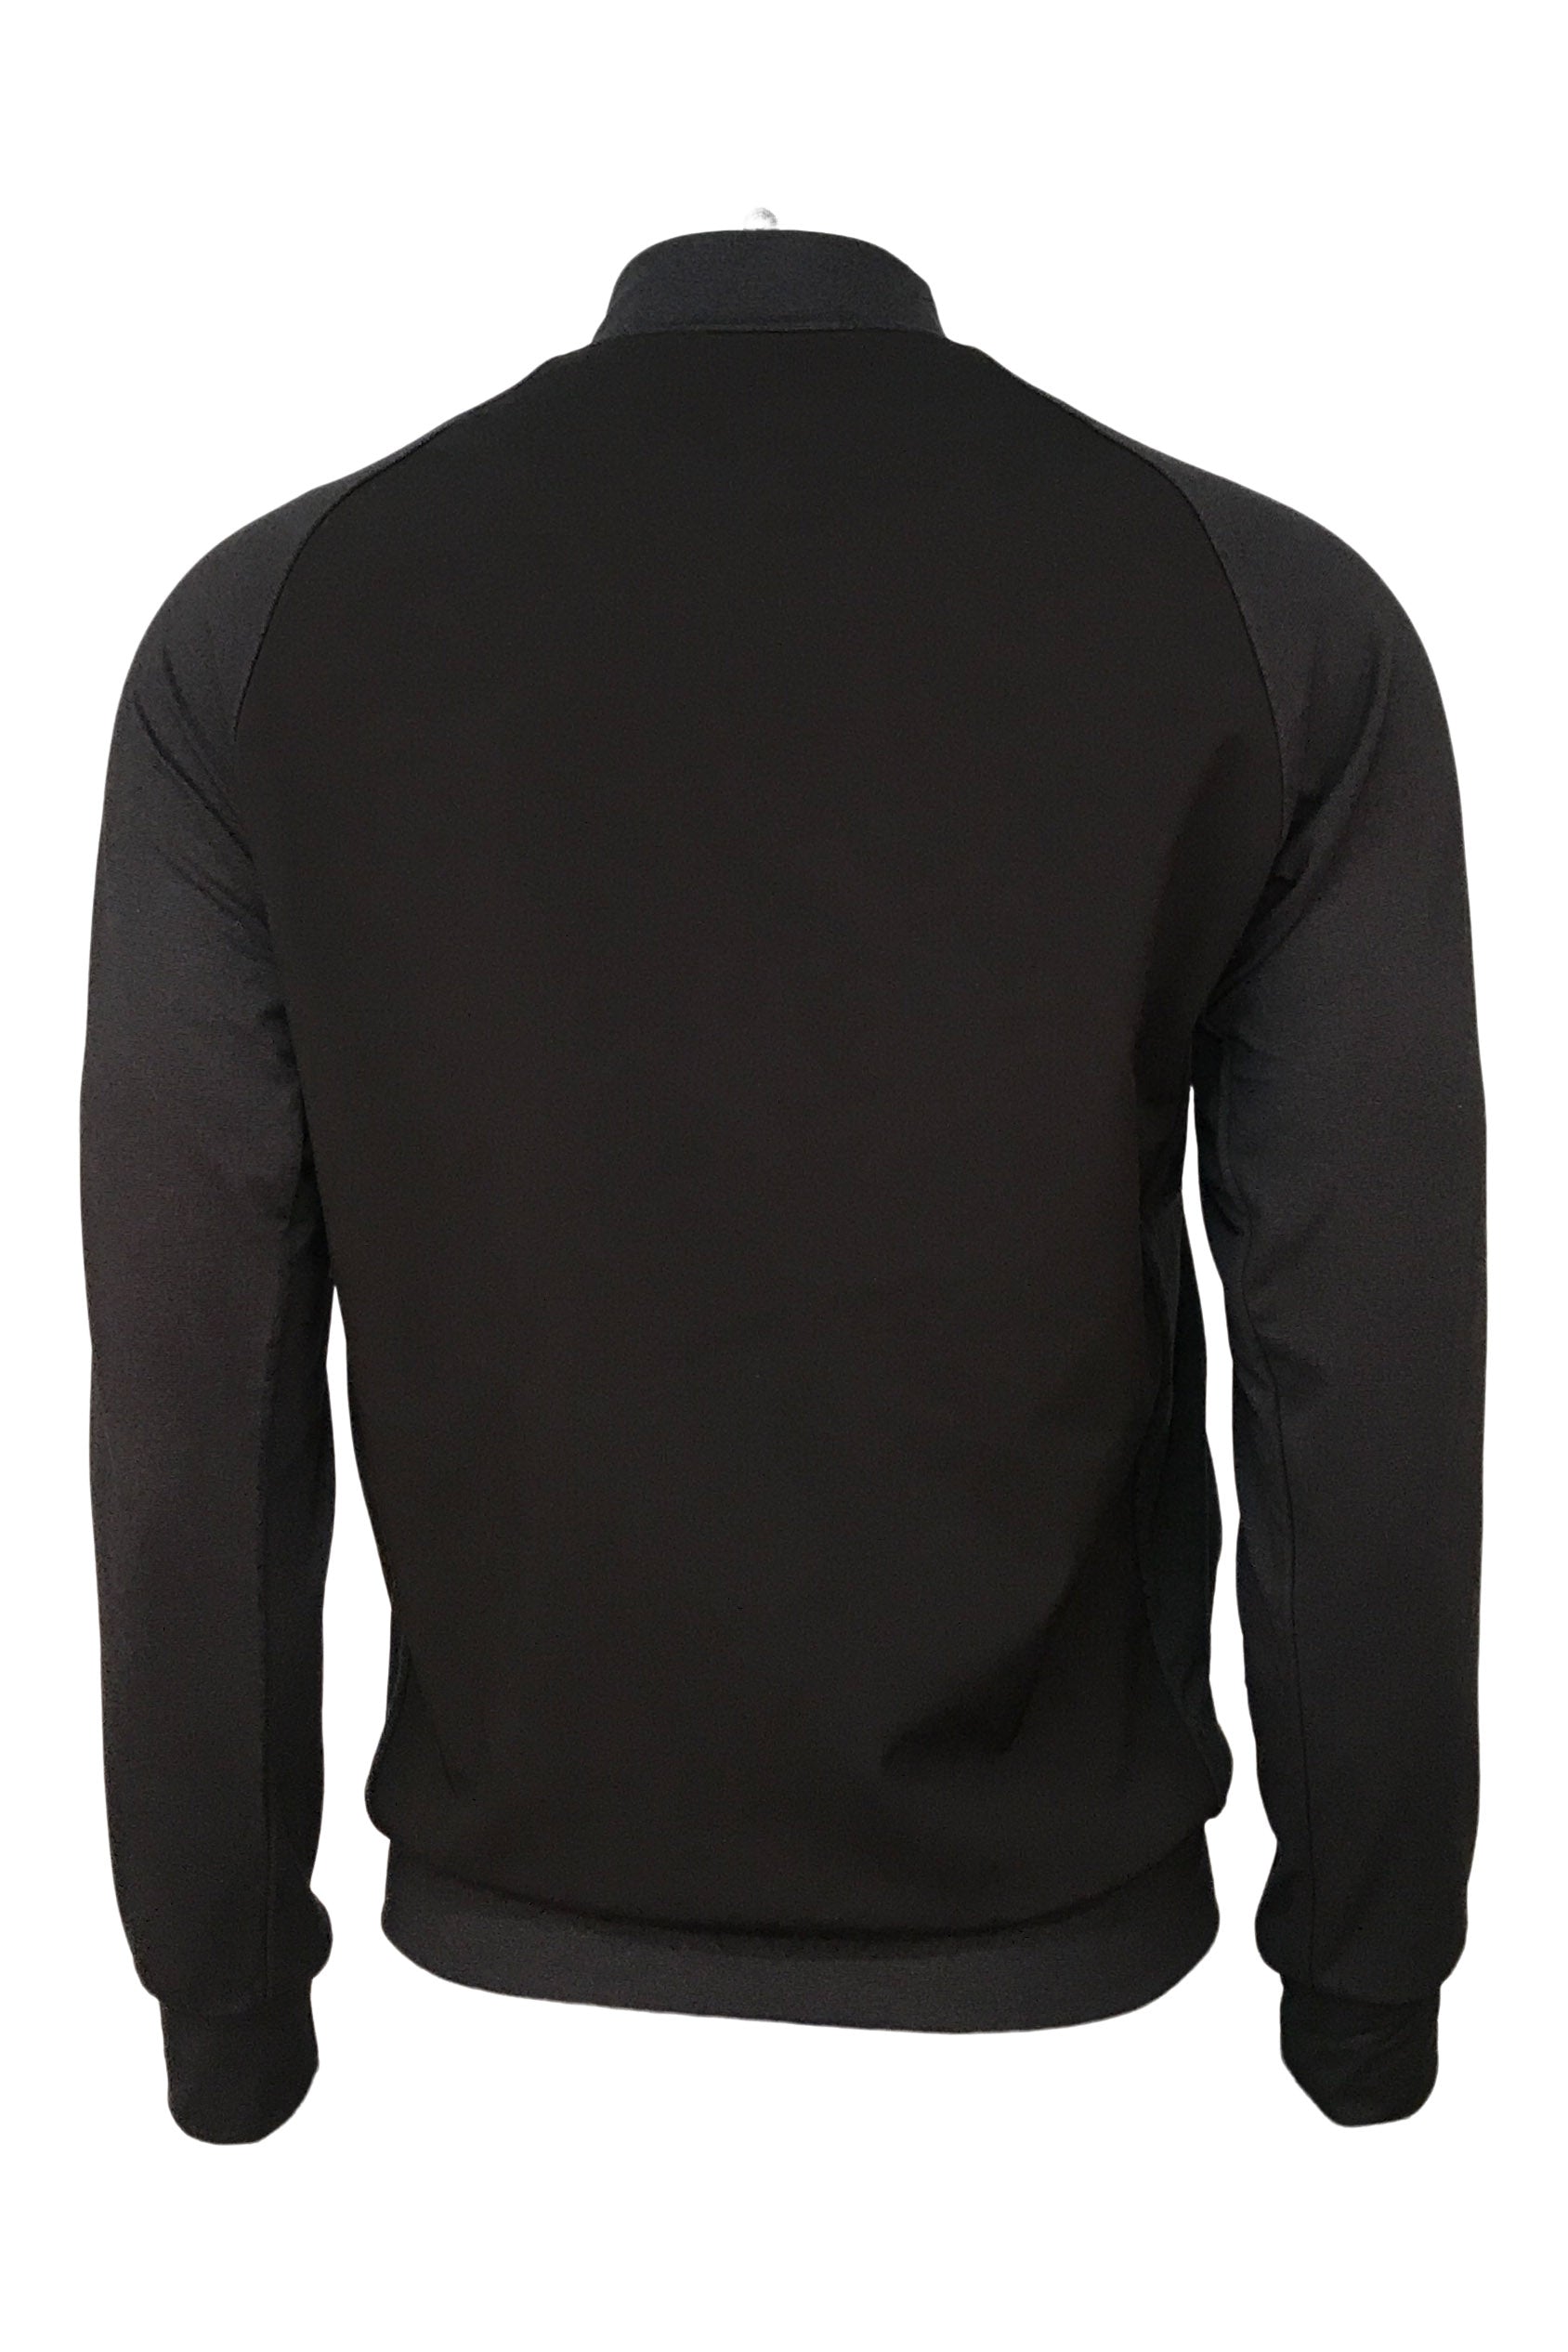 CYPRESS BOMBER - STEALTH – STATE APPAREL